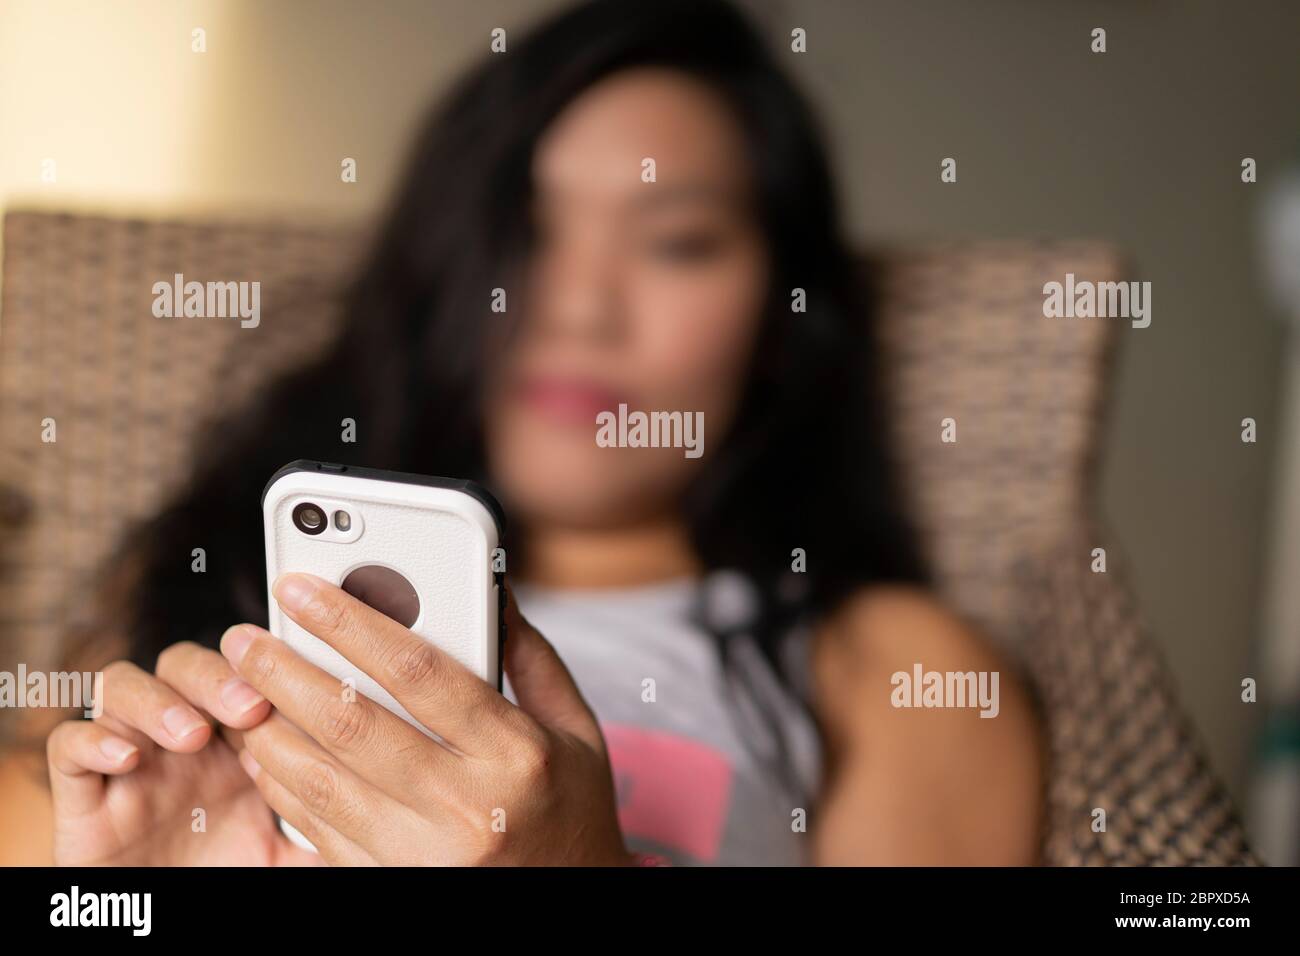 Concept image of boredom or isolation as woman  uses a mobile phone during a quarantine period in the COVID-19 Pandemic 2020 Stock Photo